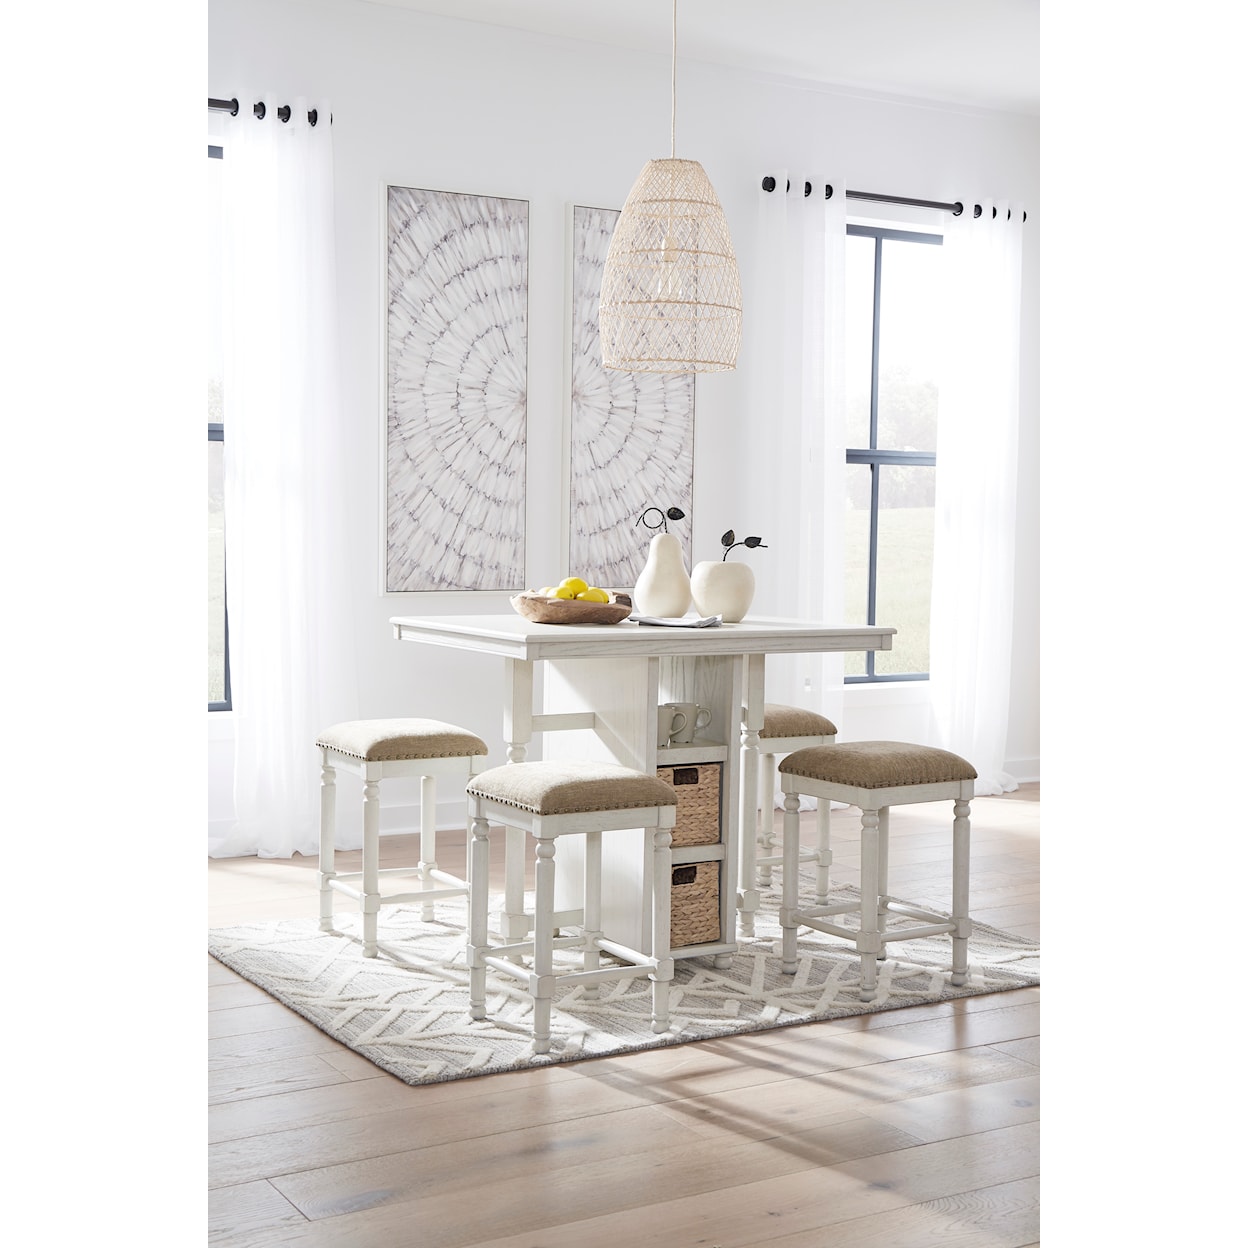 Signature Design Robbinsdale Counter Table and Bar Stools (Set of 5)